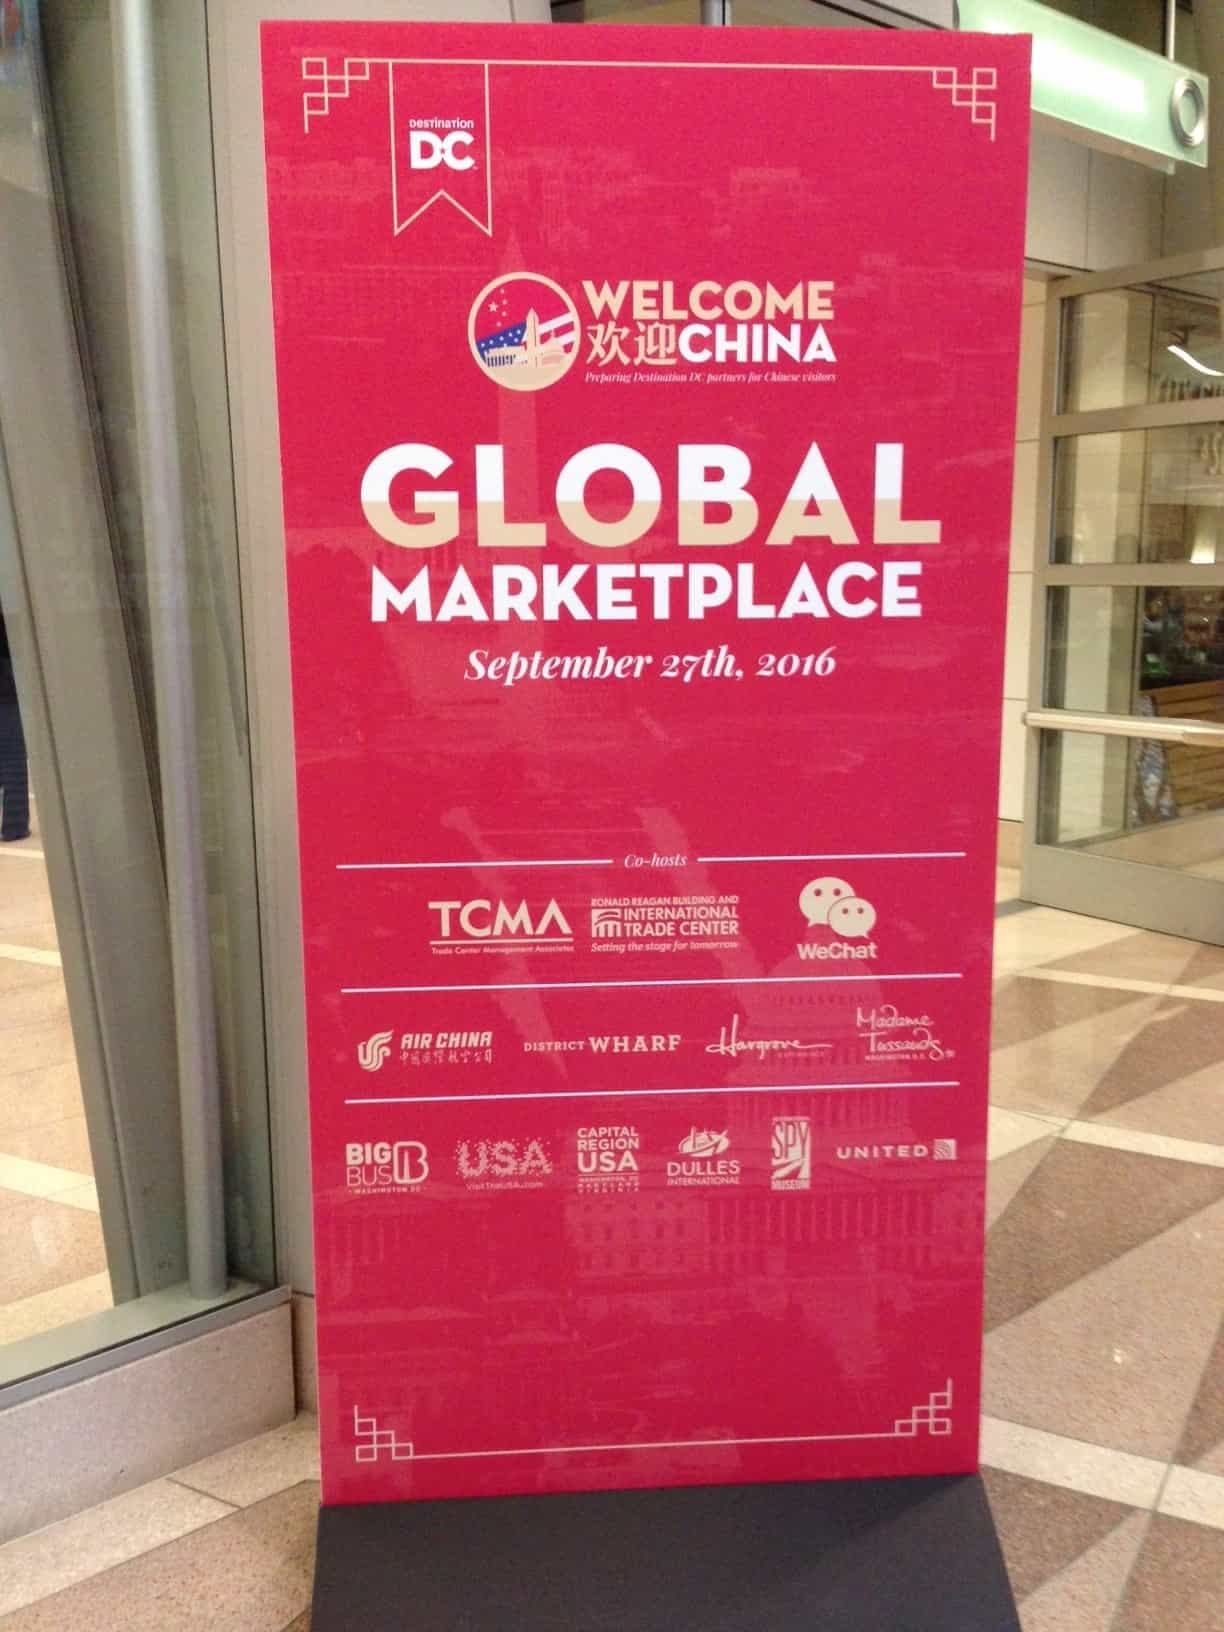 Destination DC’s 2016 Global Marketplace: Welcome China